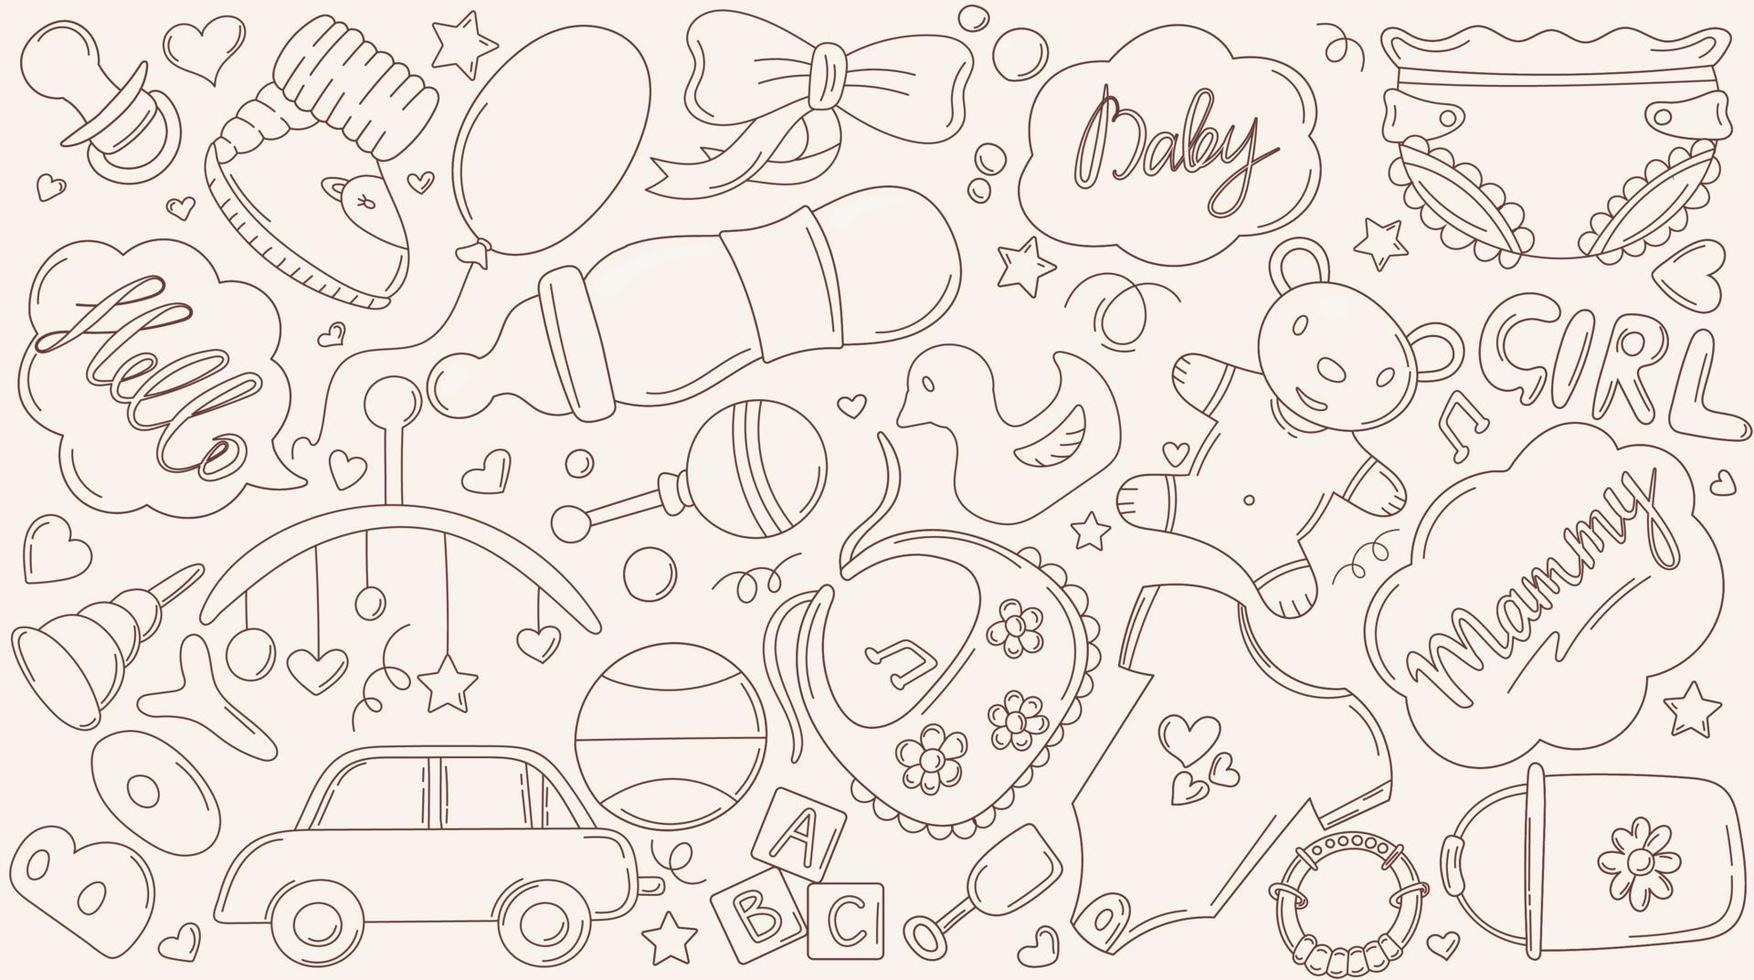 Vector illustration of cartoon baby pattern with things for a newborn.